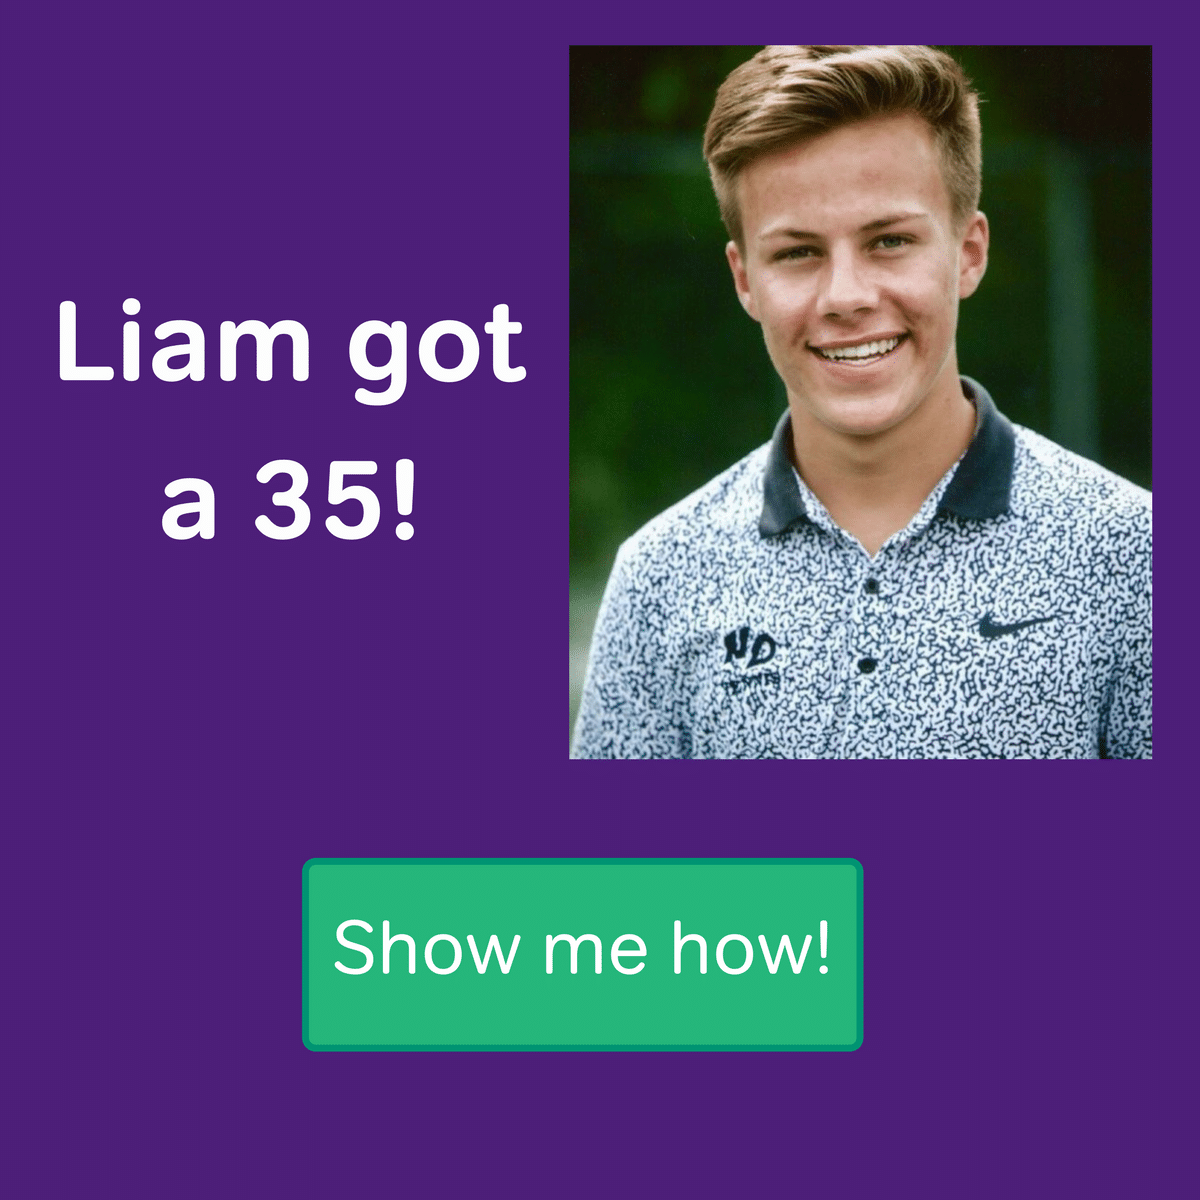 Liam scored a 35 on his ACT with Magoosh. Find out how!